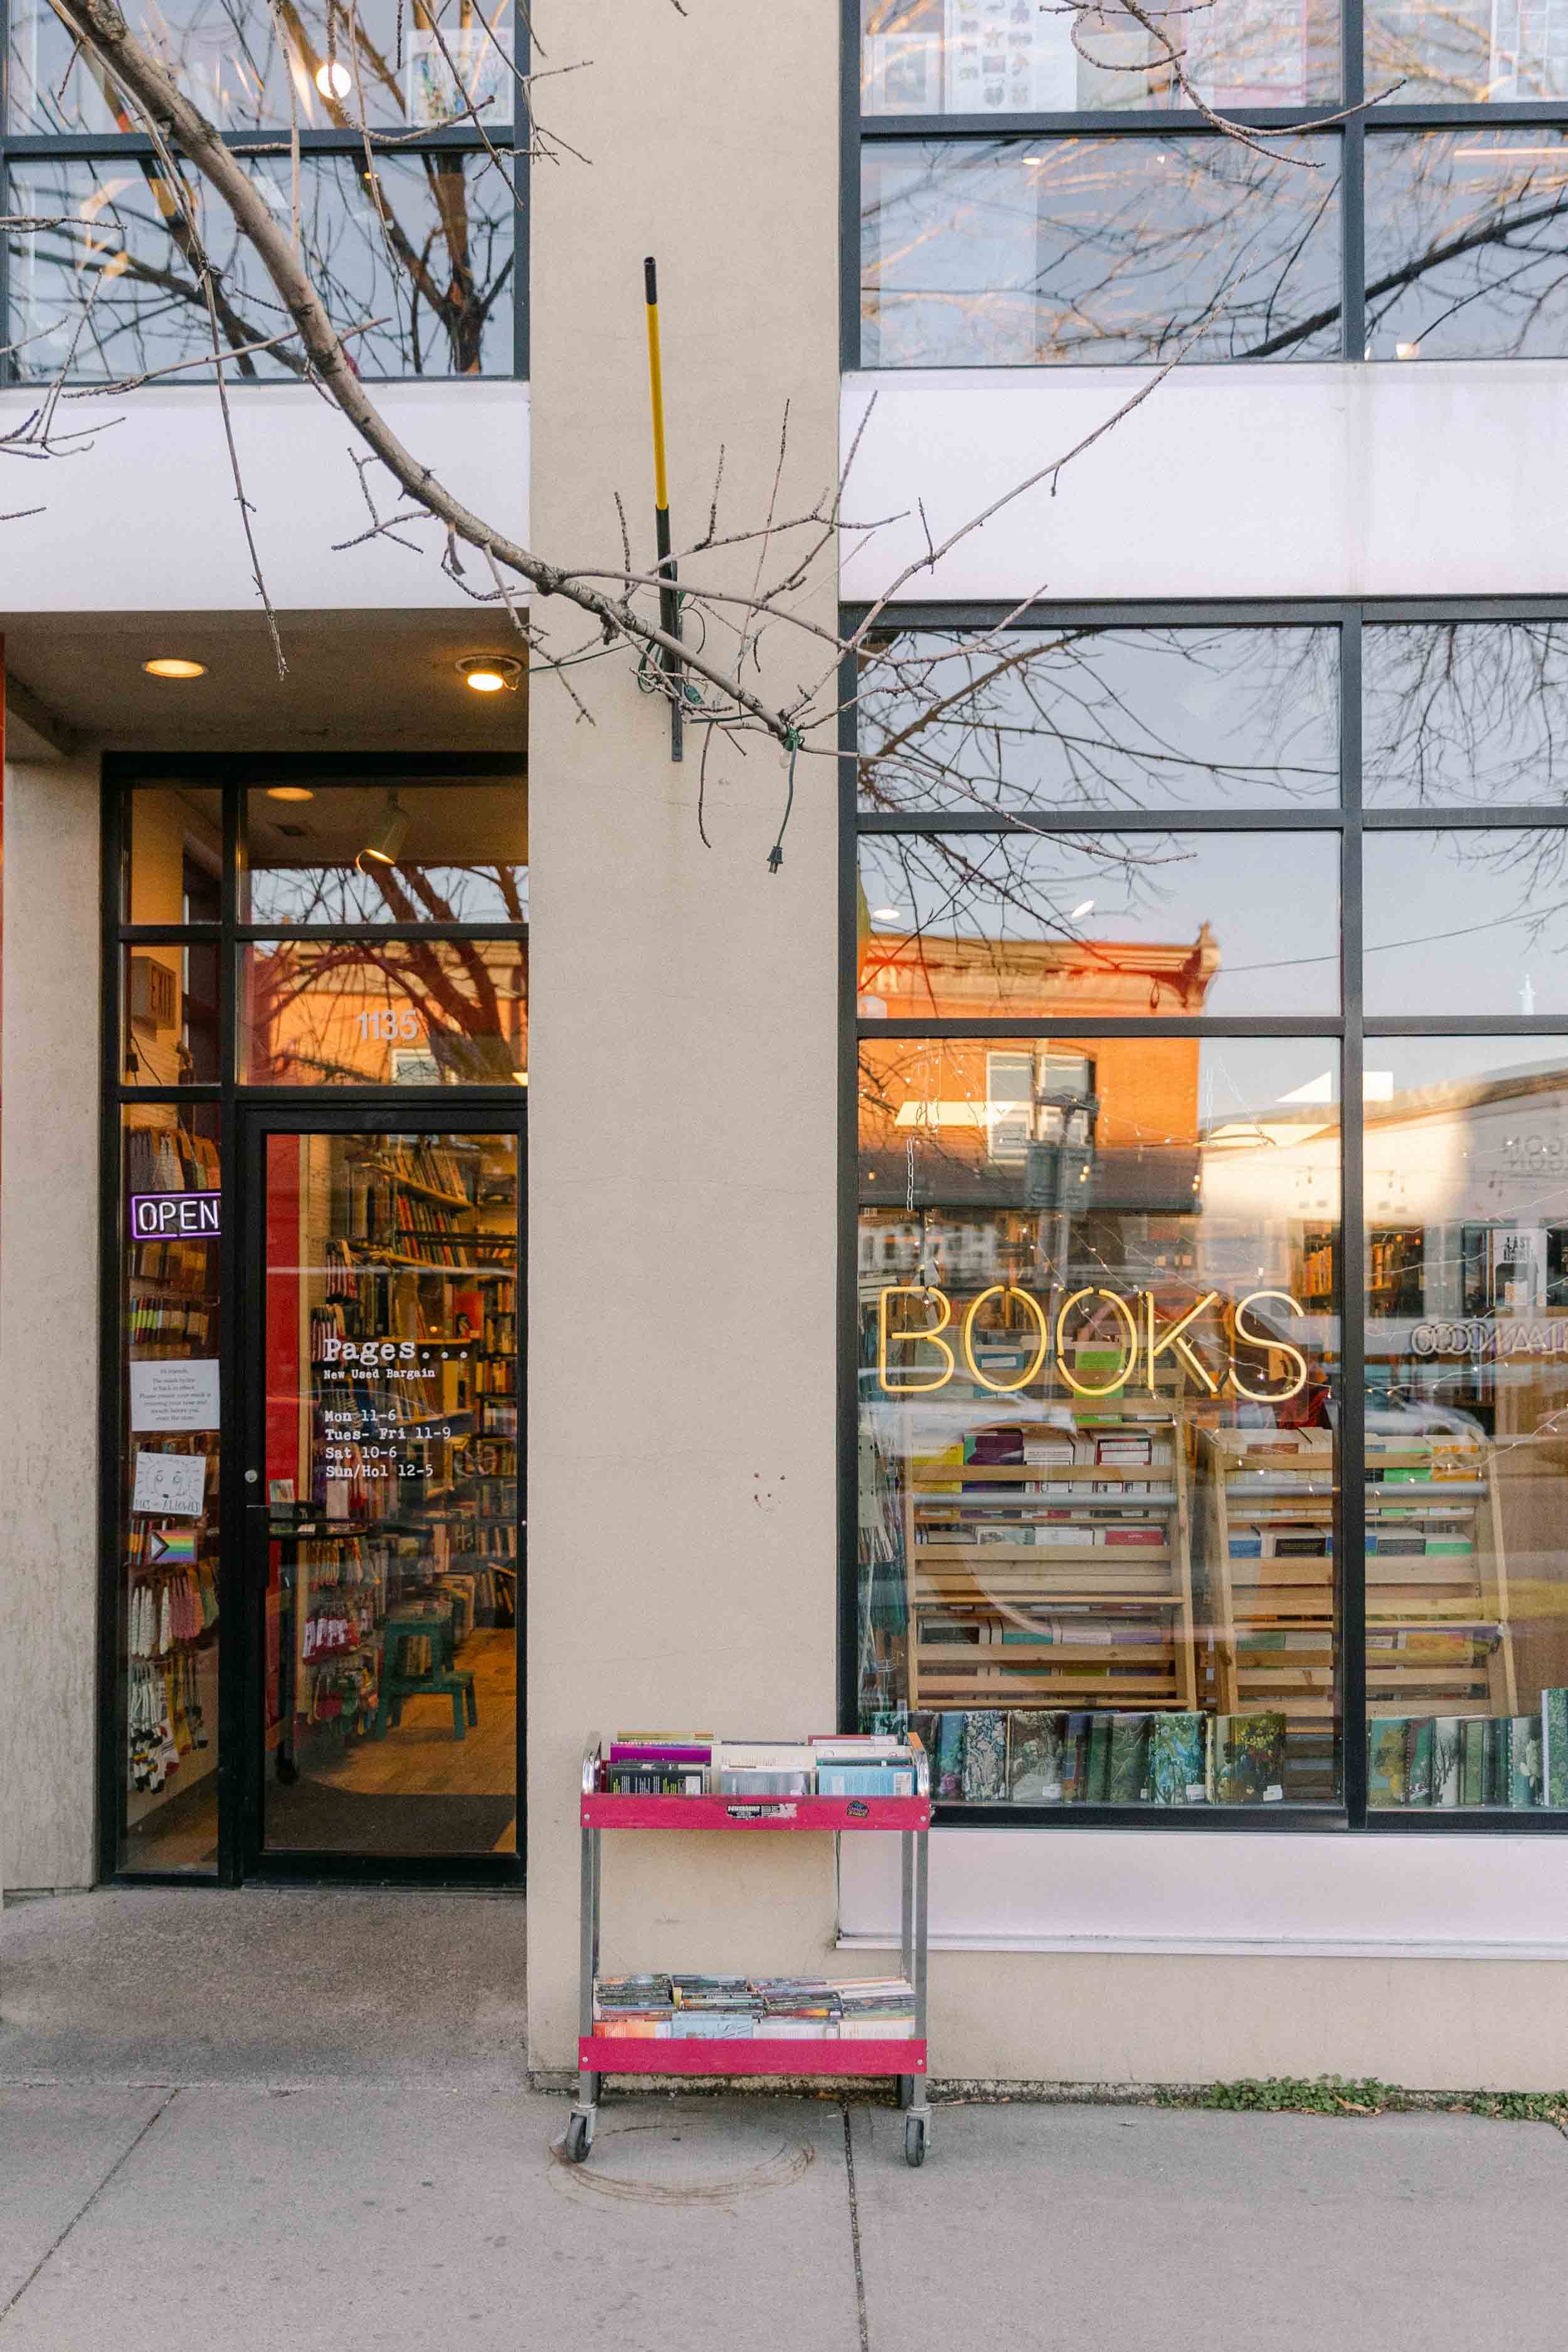 Pages Books on Kensington 5 Best Local Bookstores Calgary Branding Photographer Jennie Guenard Photography